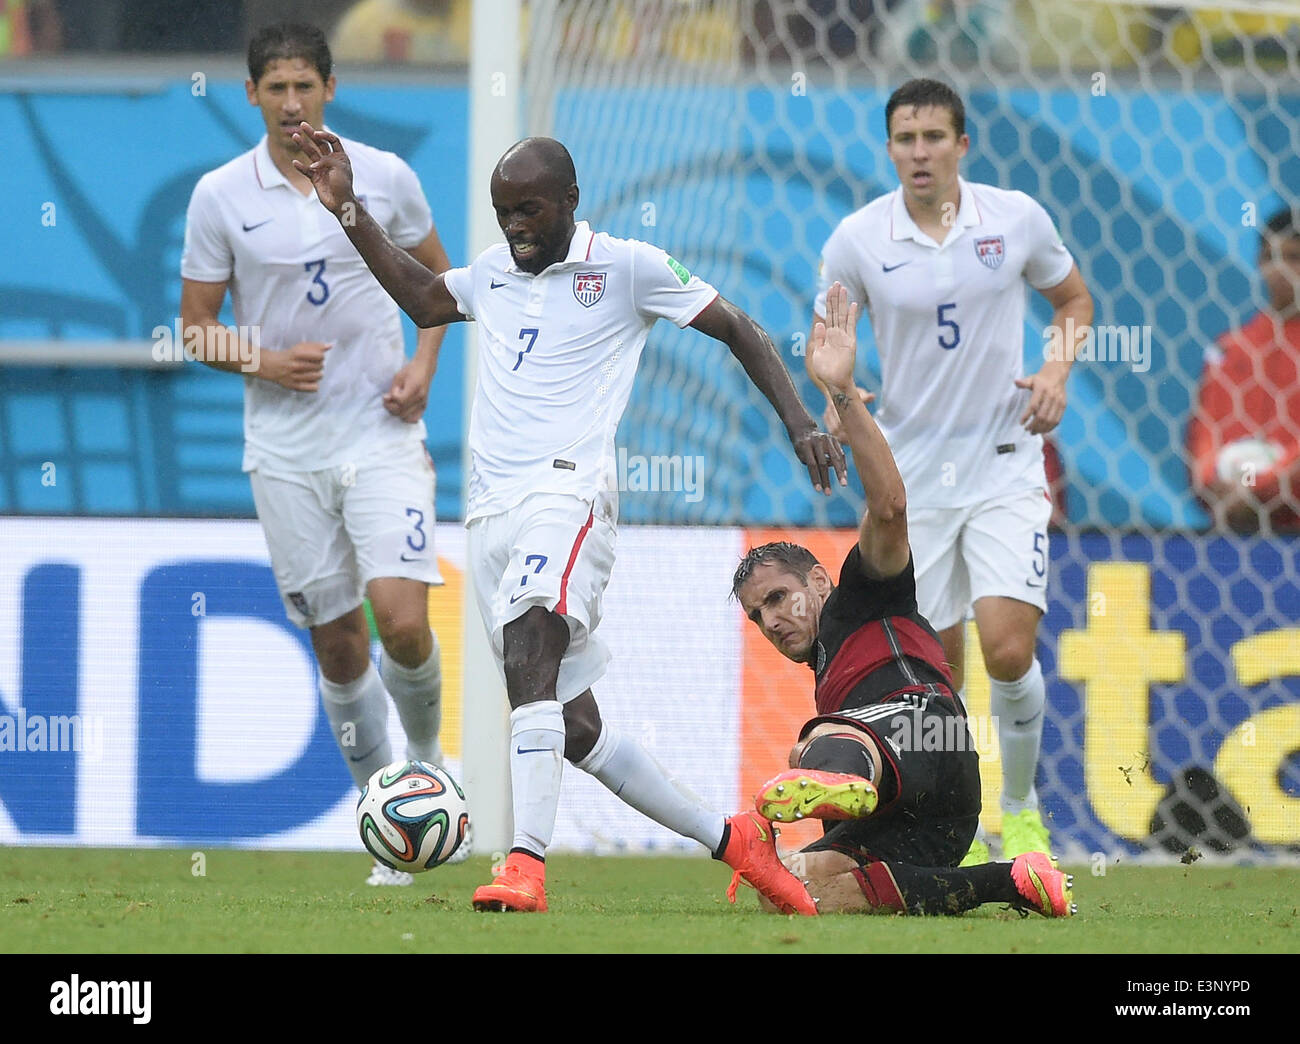 Recife, Brazil. 26th June, 2014. Germany's Miroslav Klose vies for the ball with Omar Gonzalez (L-R), DaMarcus Beasley and Matt Besler of the US during the FIFA World Cup group G preliminary round match between the USA and Germany at Arena Pernambuco in Recife, Brazil, 26 June 2014. Photo: Marcus Brandt/dpa/Alamy Live News Stock Photo